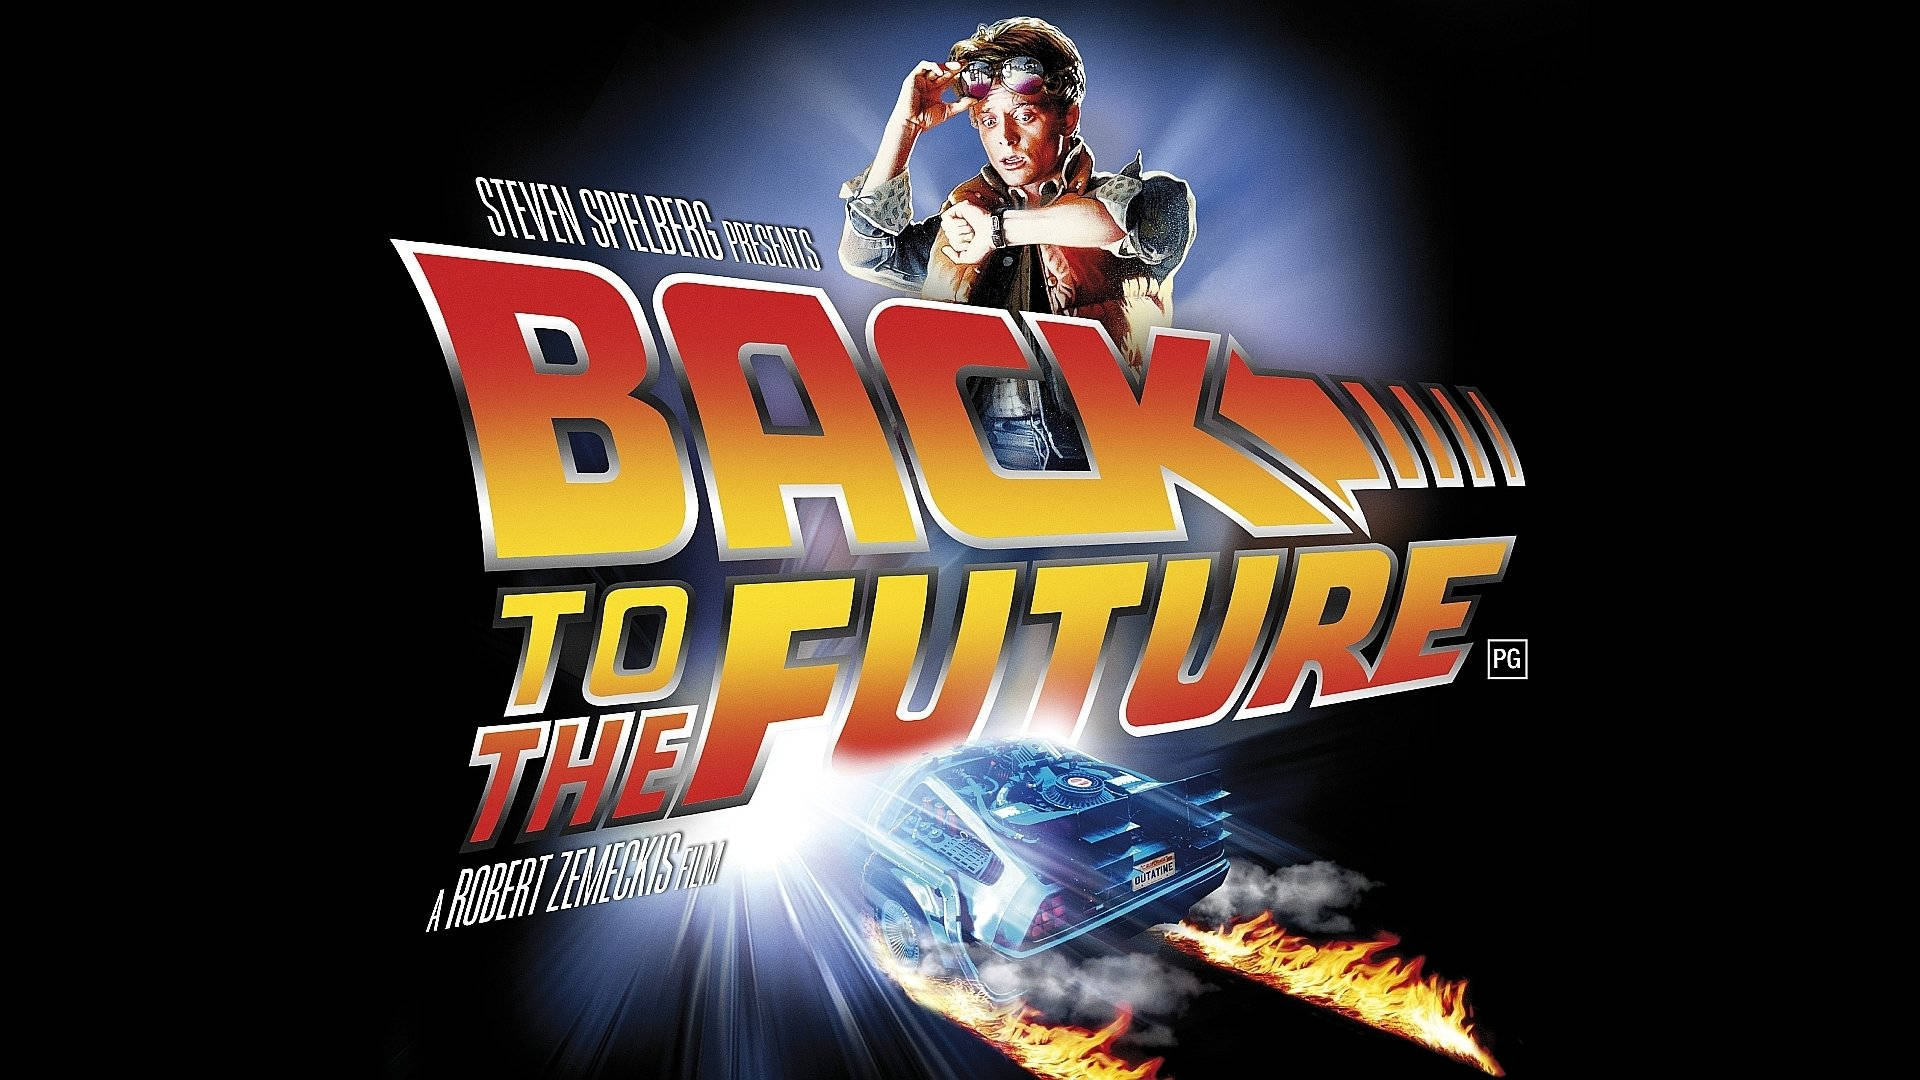 1920X1080 Back To The Future Wallpaper and Background